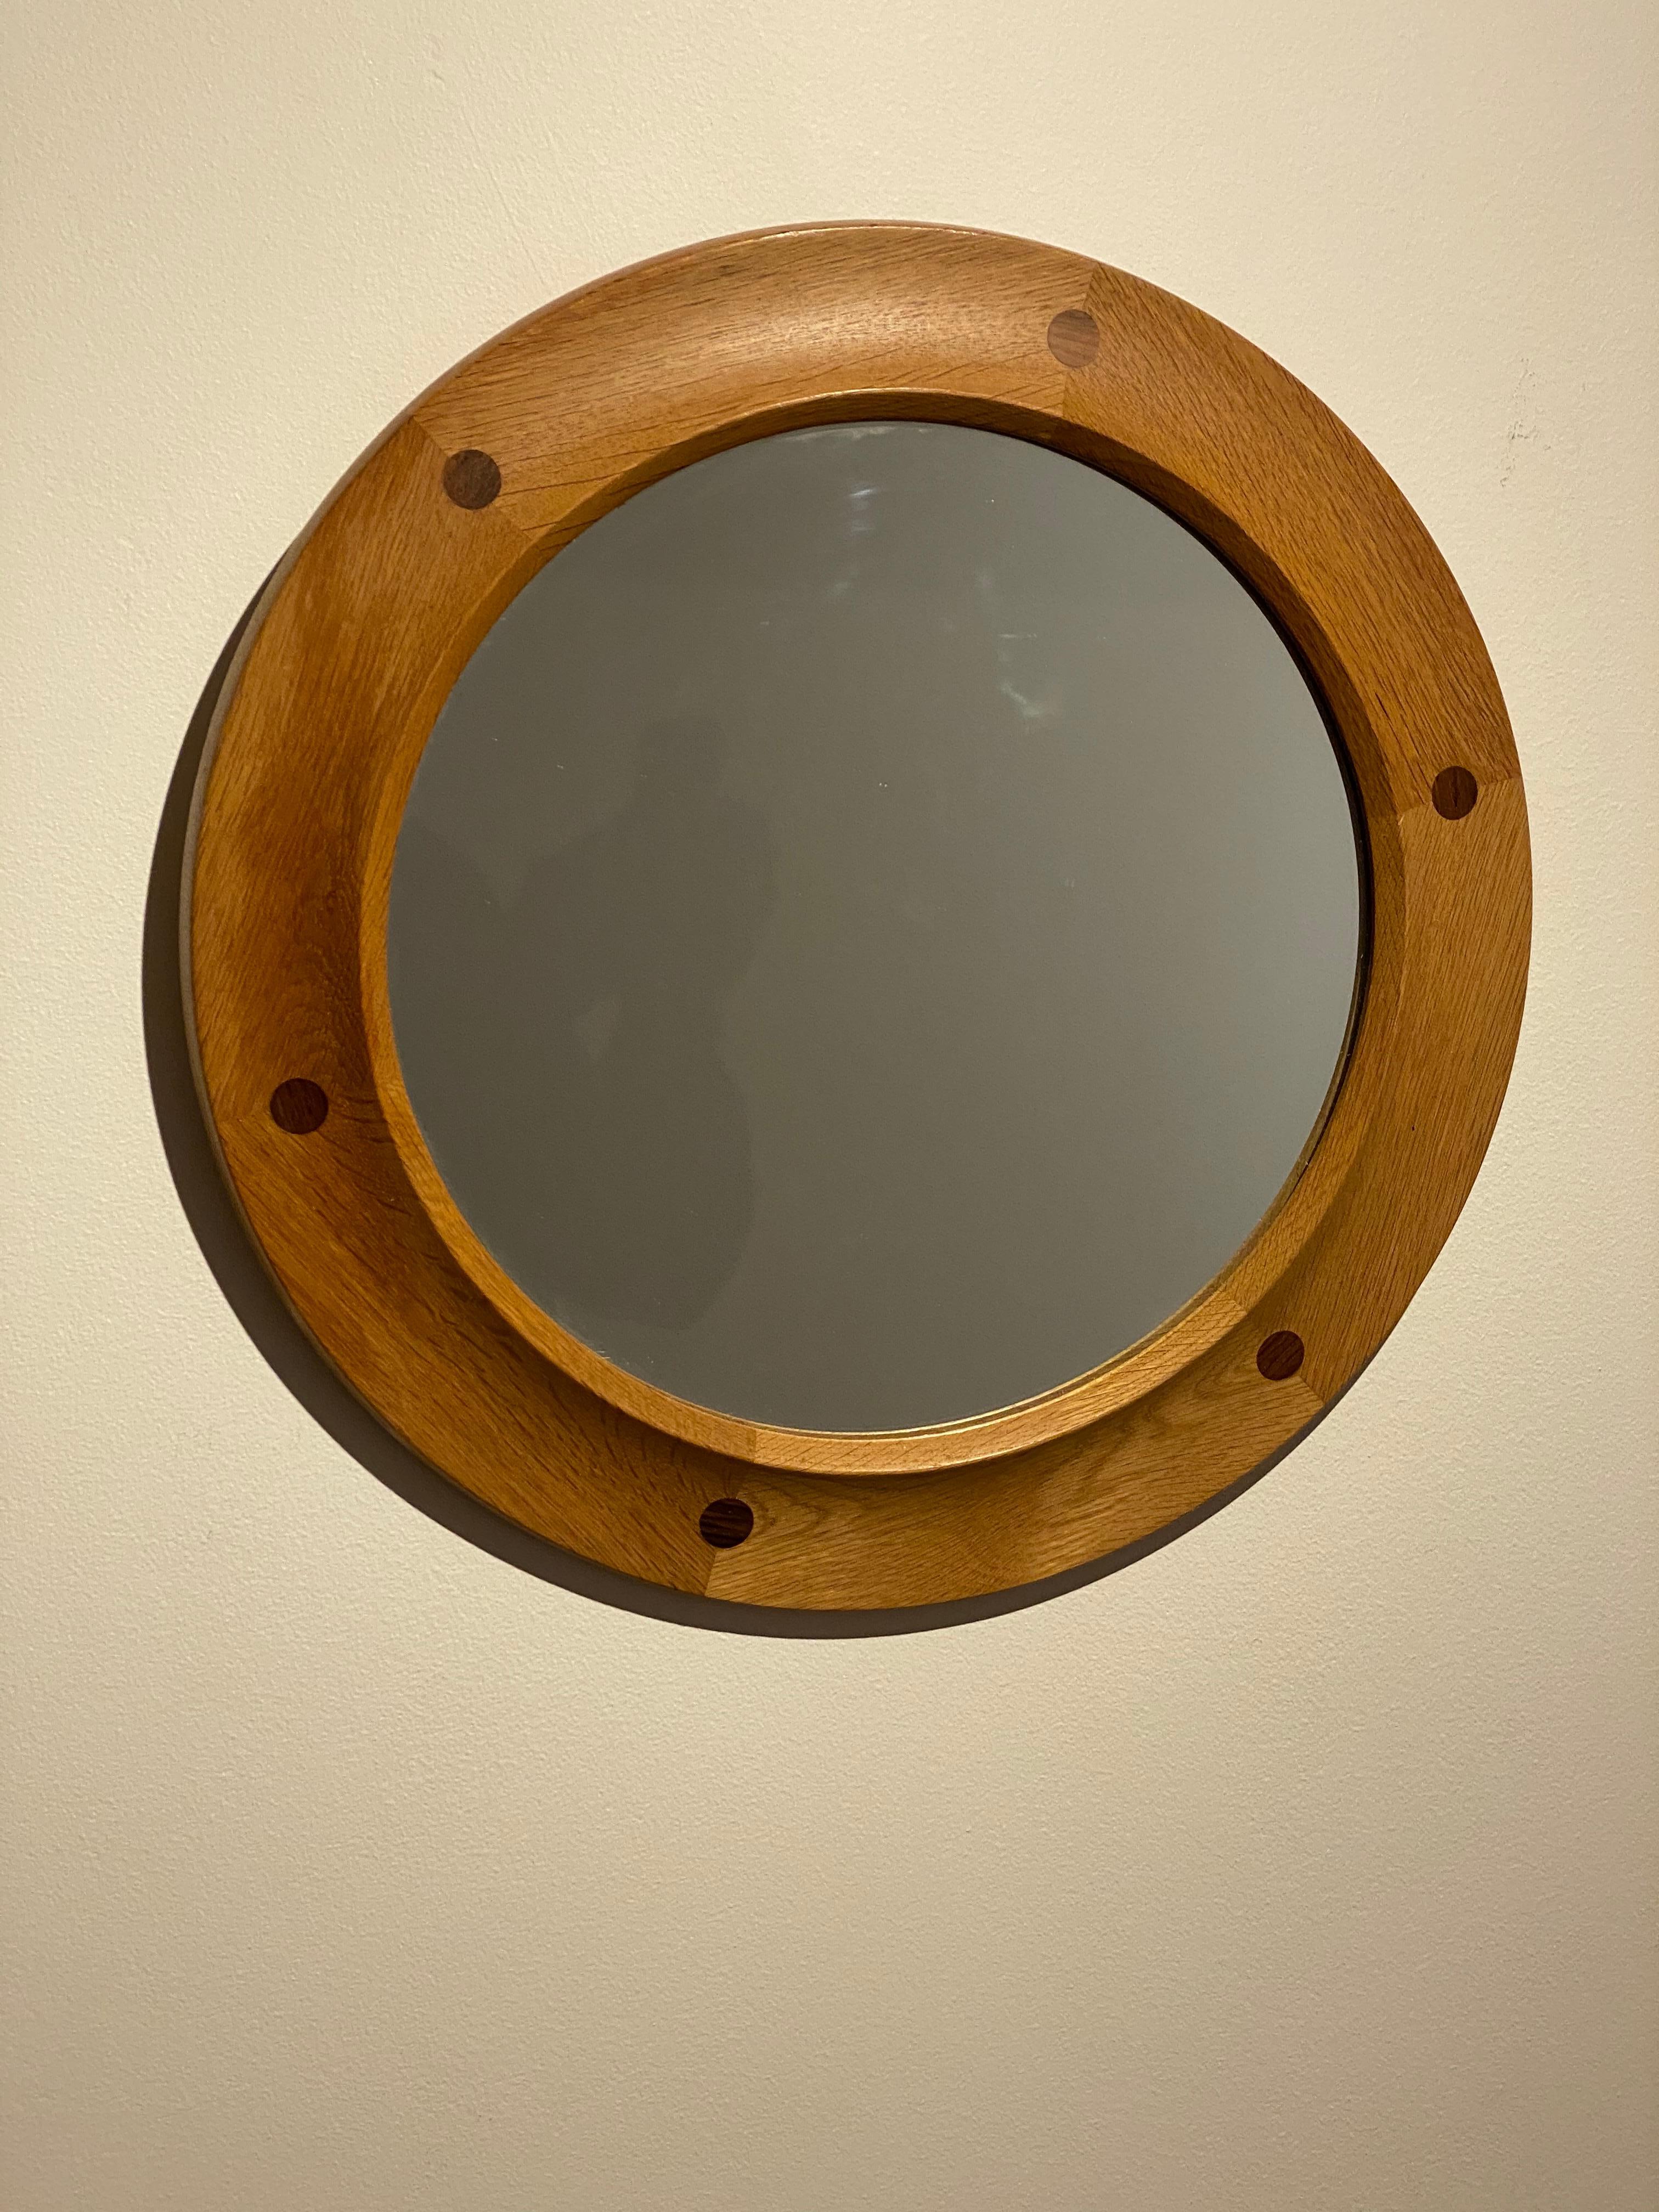 A stained oak mirror, glass with a finely sculpted oak frame wrapping the glass in a round form. Features superb teak joinery. Produced by Fröseke, AB Nybrofabriken. Model 